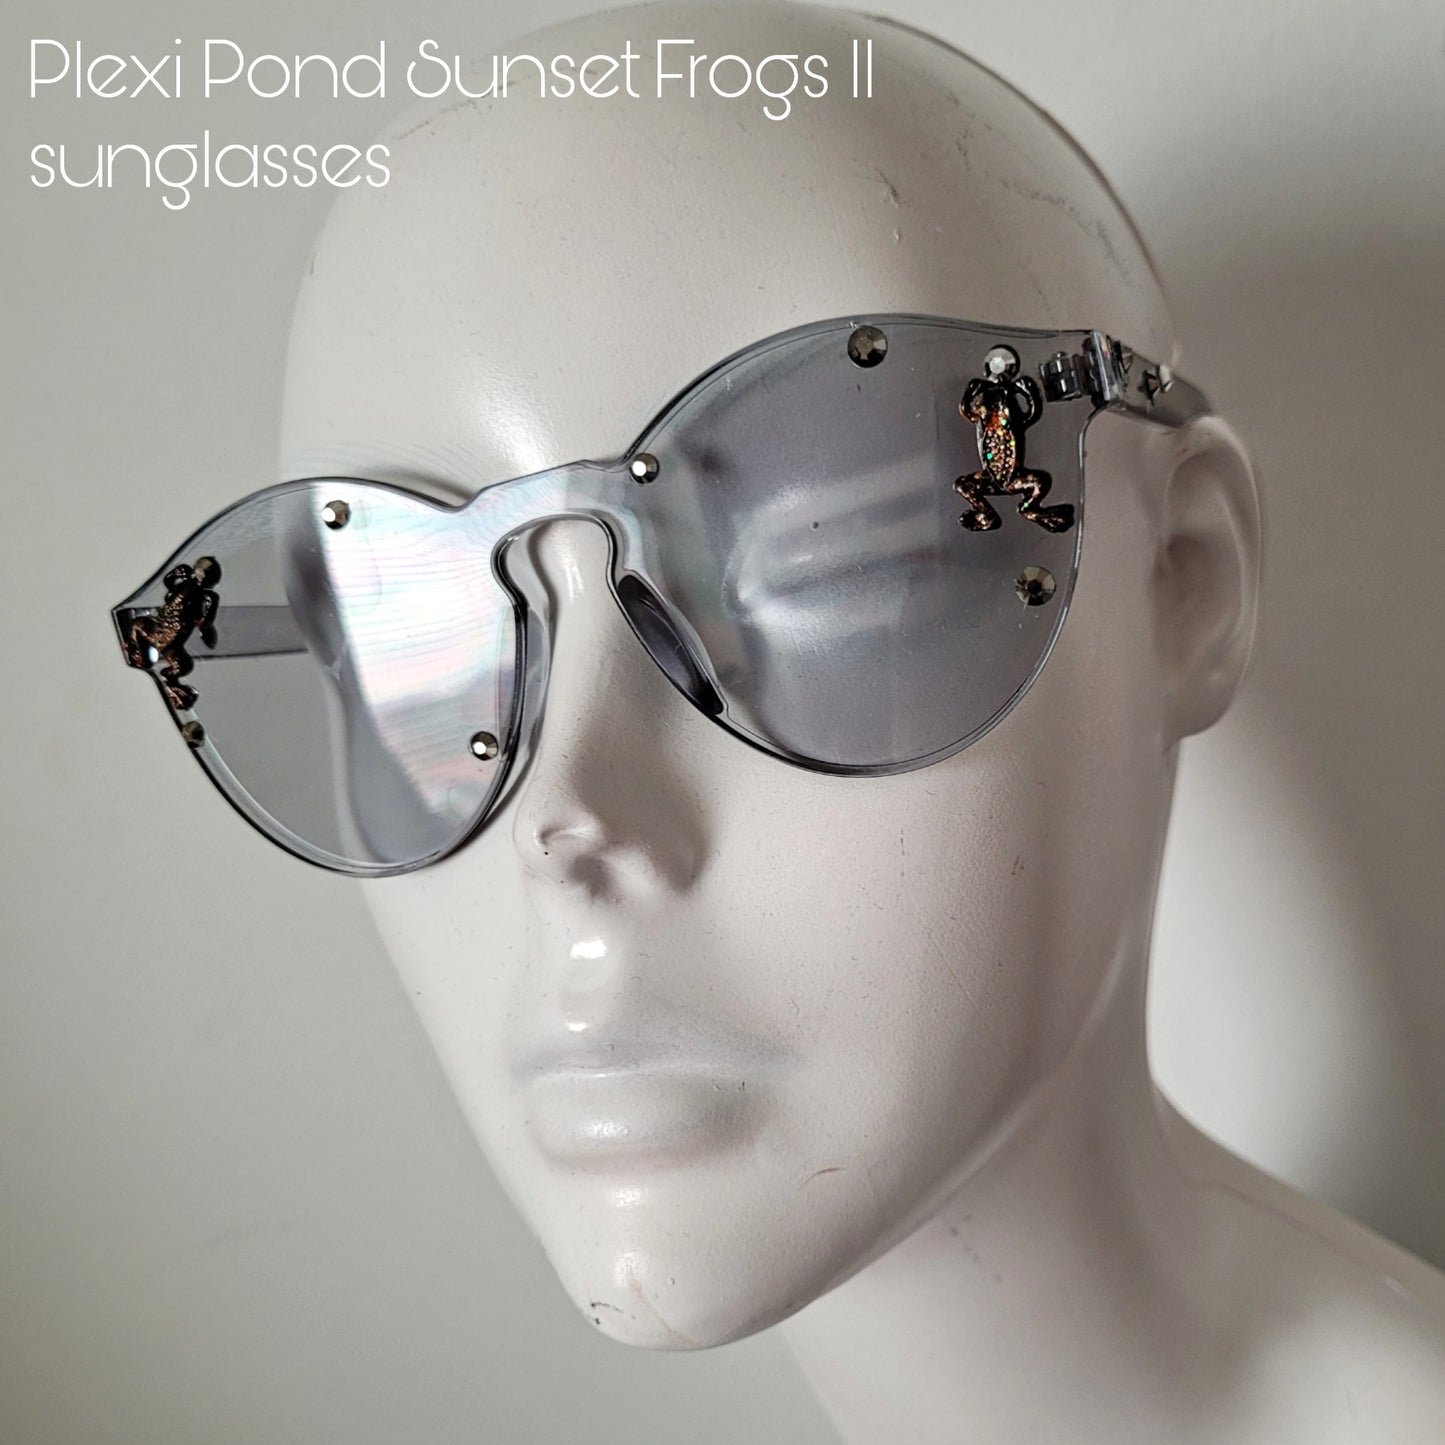 The Plexi Pond Sunset Frogs sunglasses, limited edition